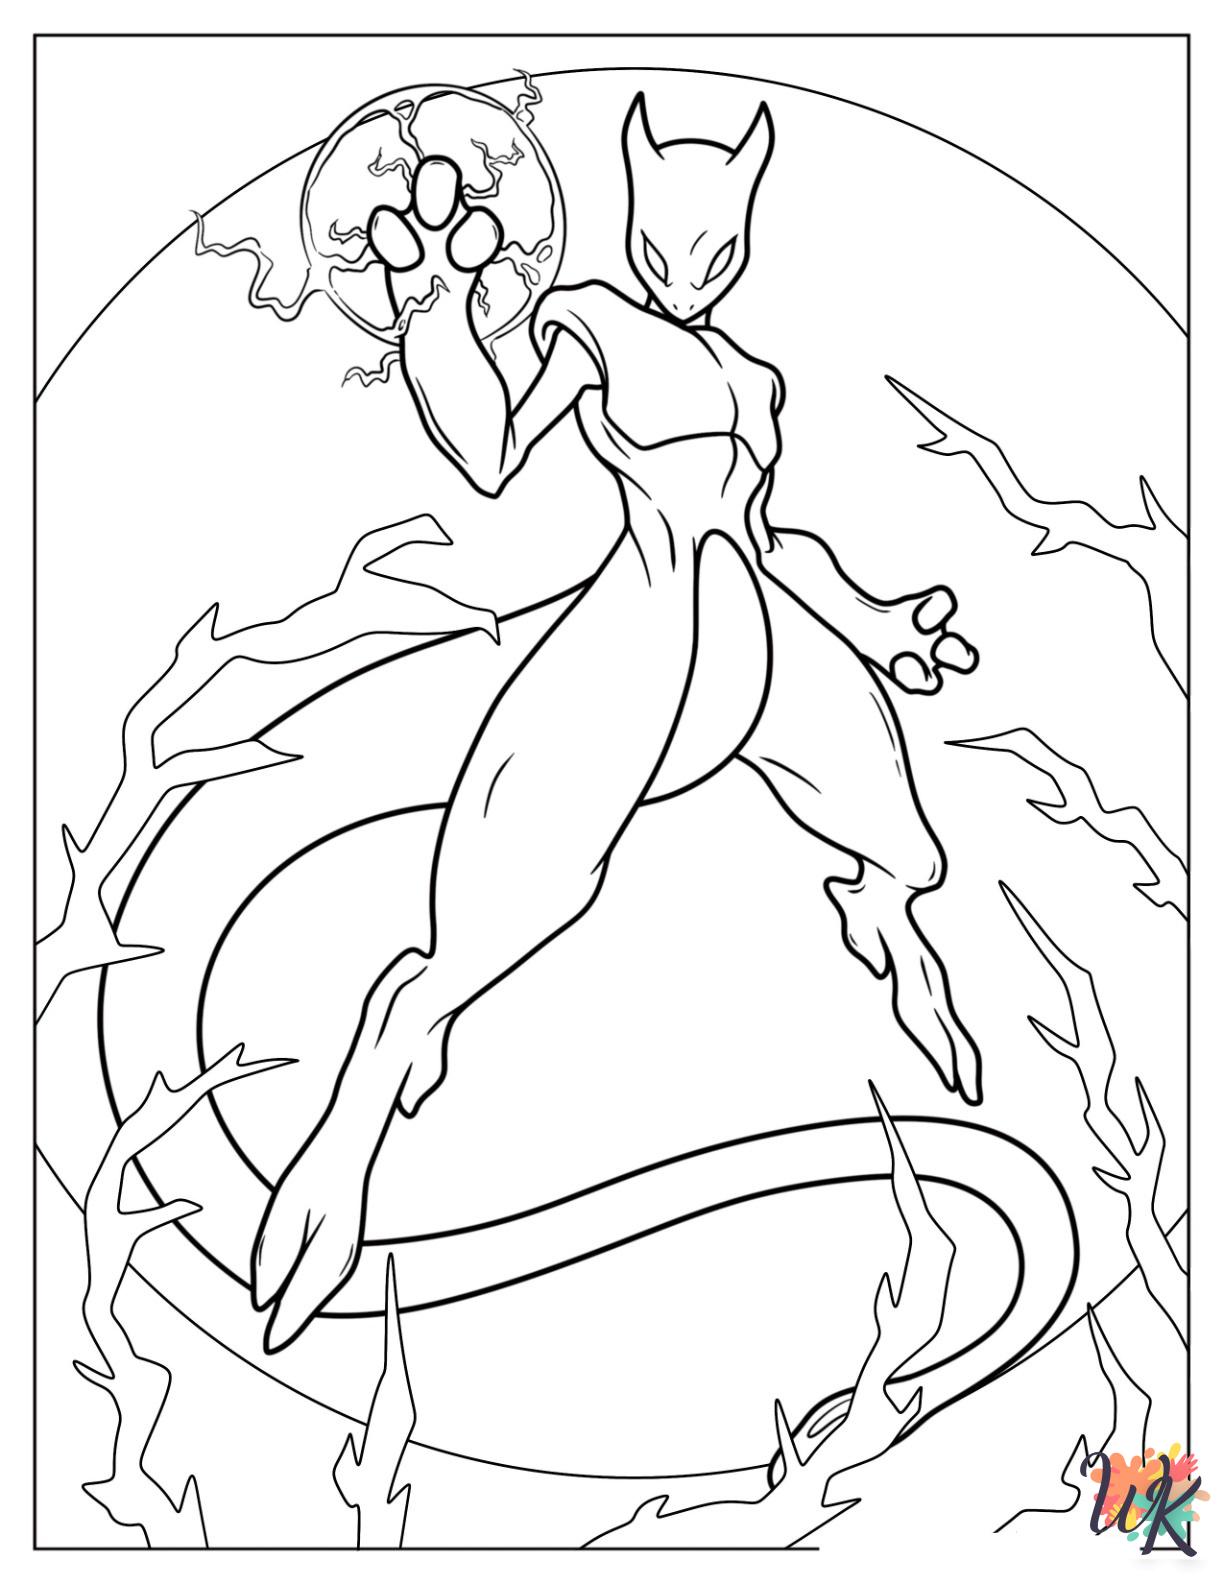 Legendary Pokemon coloring pages for adults easy